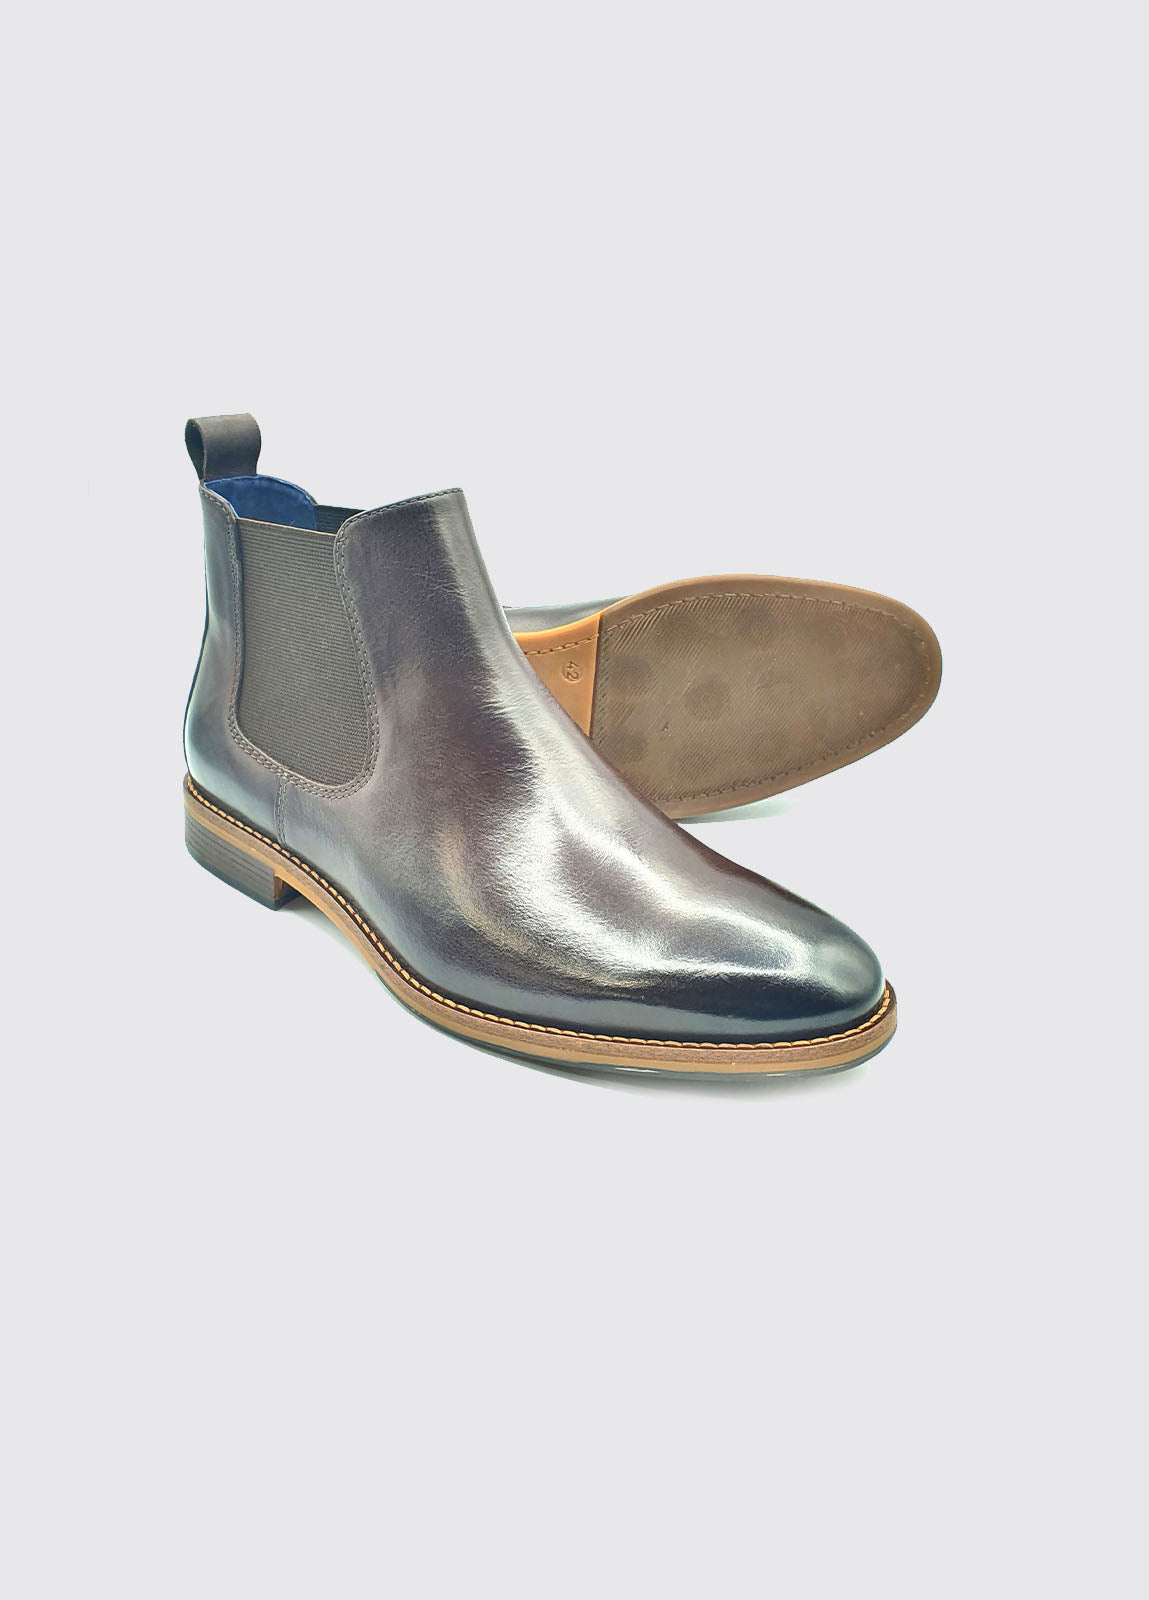 Steed Slip On Mahogany Chelsea Boot-Sole view